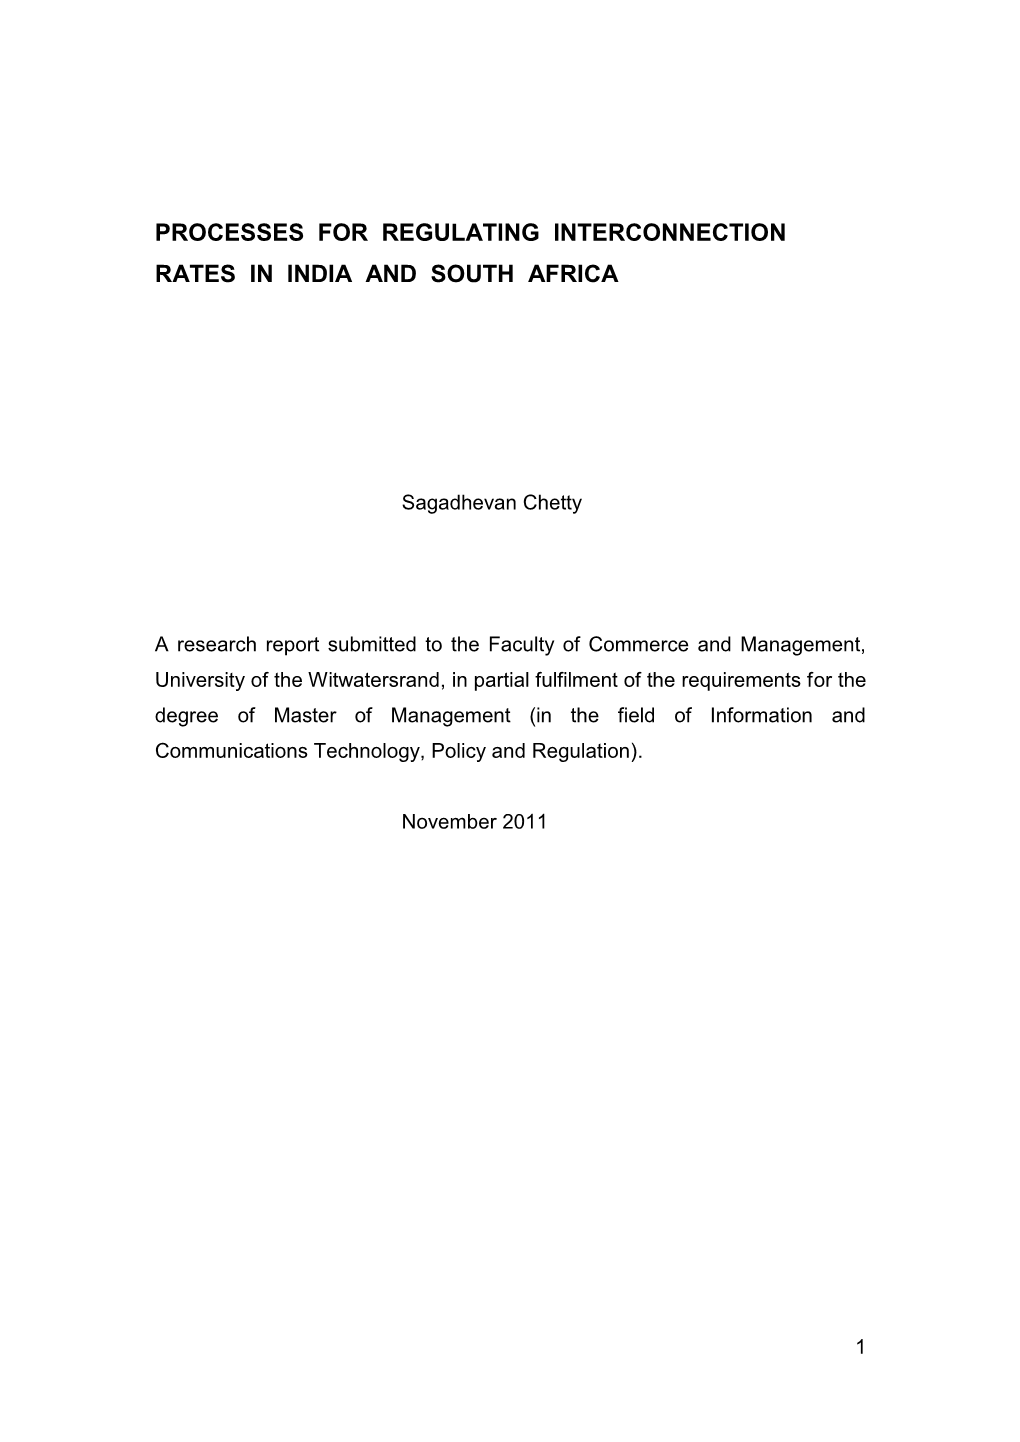 Processes for Regulating Interconnection Rates in India and South Africa